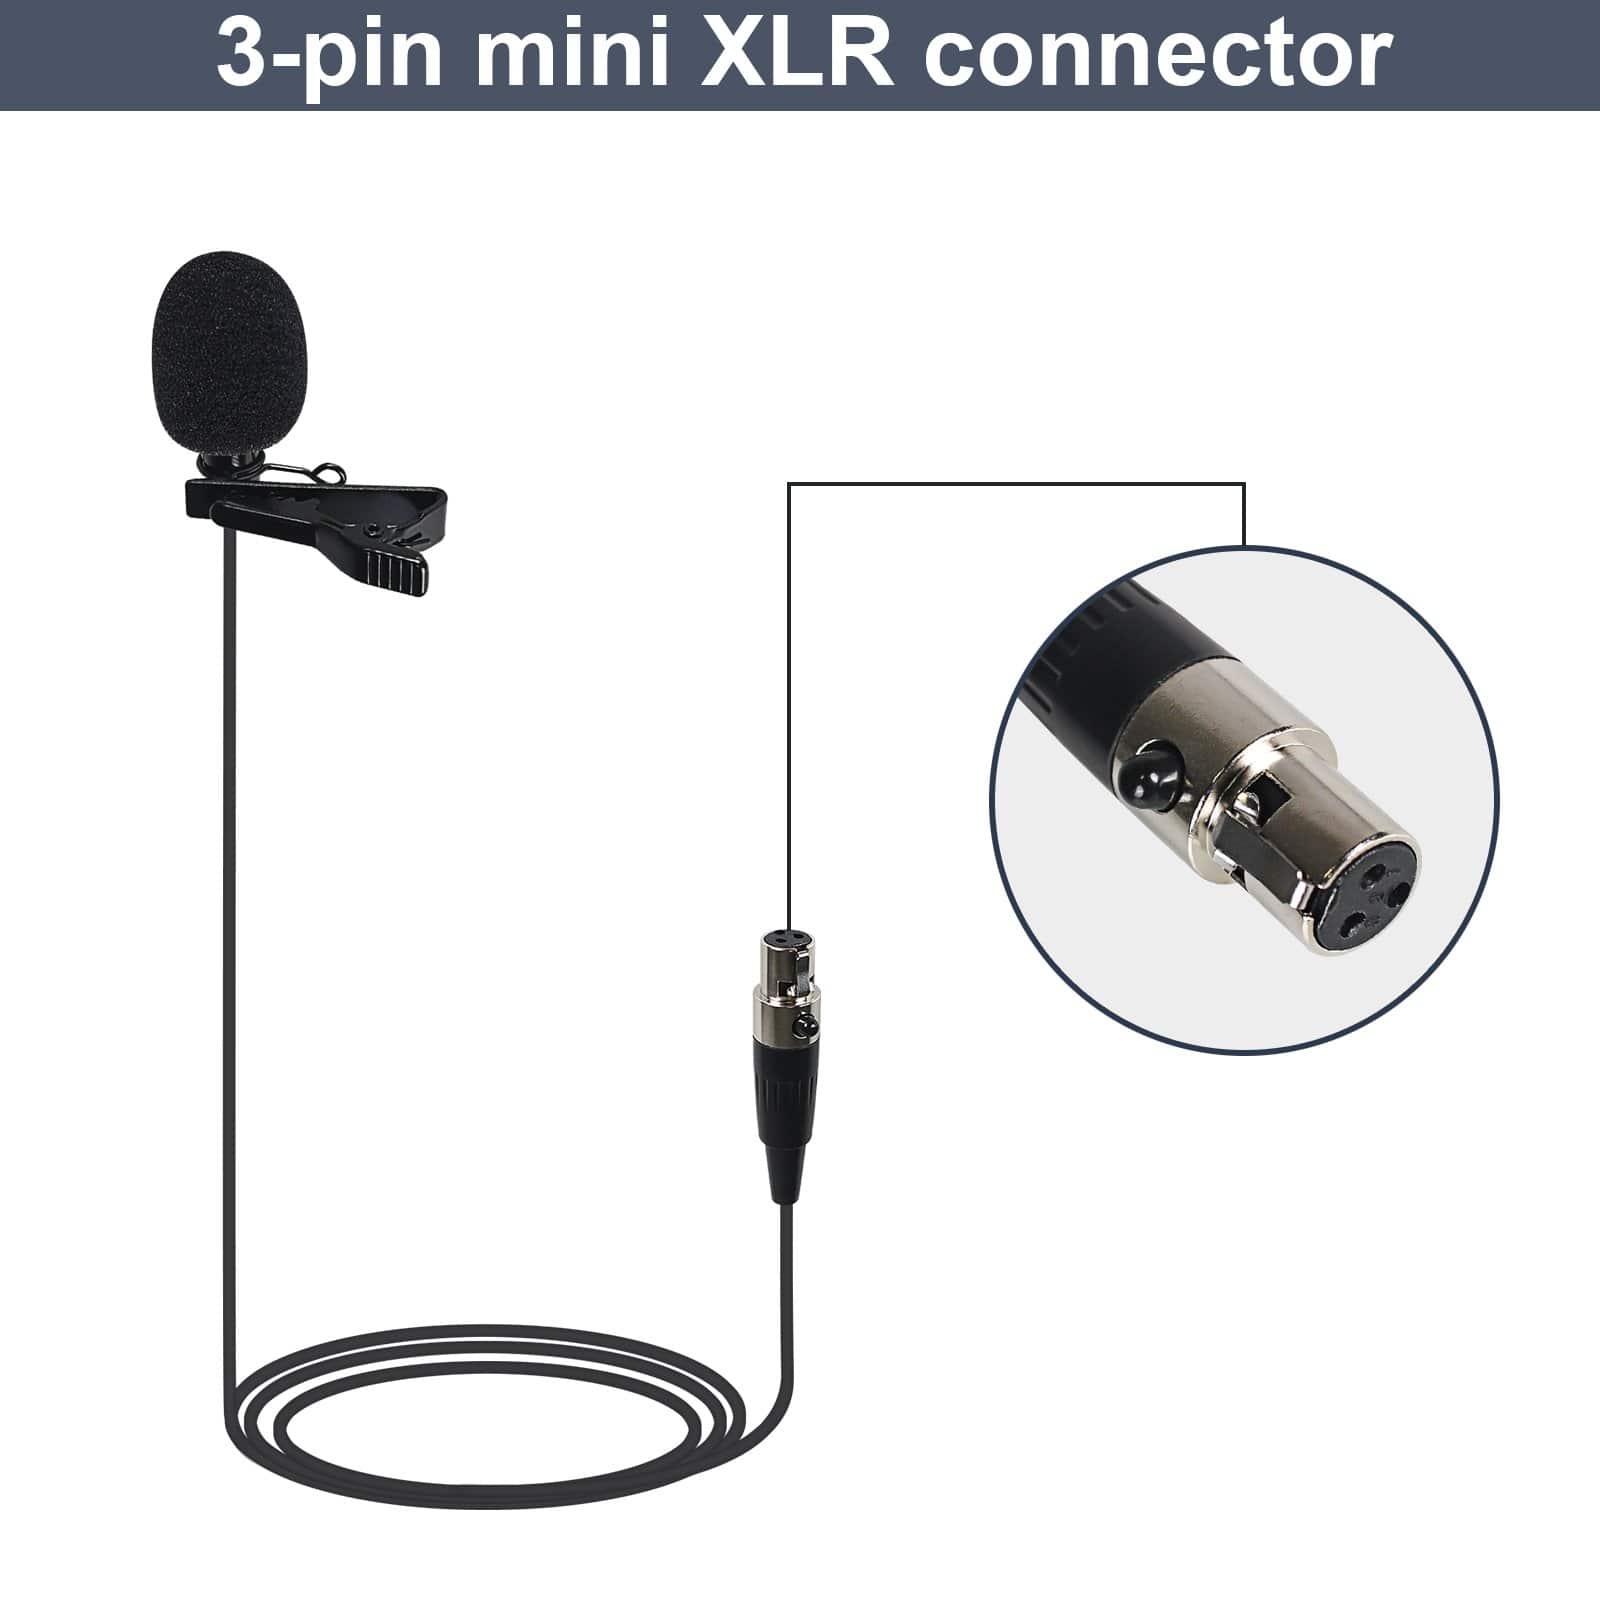 Phenyx Pro Black Lavalier Lapel Microphone Combo With 3 Pin Mini XLR Jack (Pack of 2)